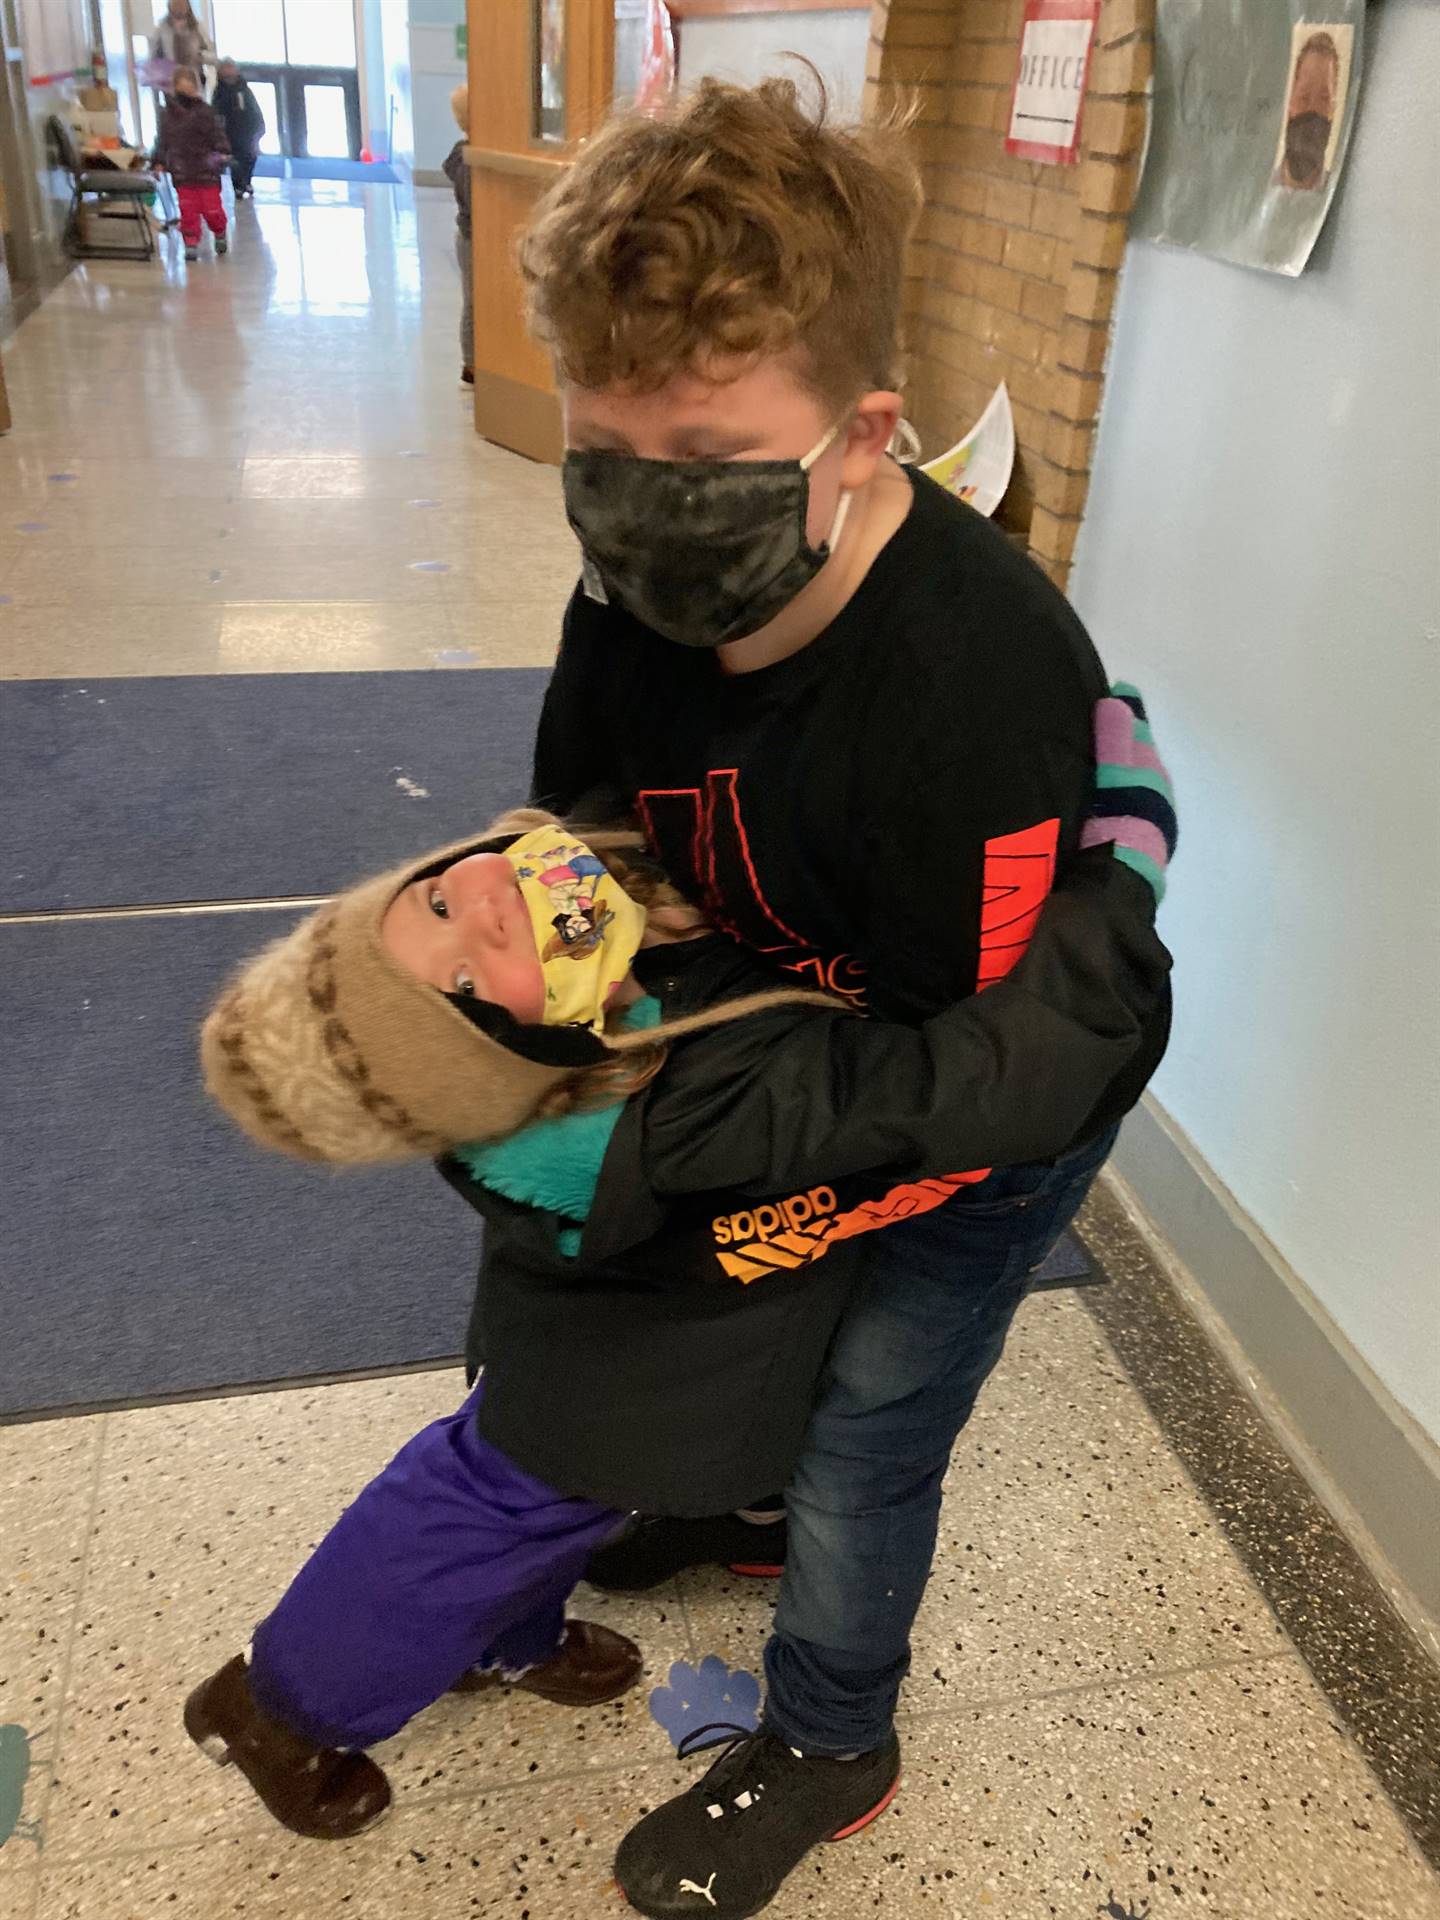 2 students with winter clothes and mask are hugging in a hallway.